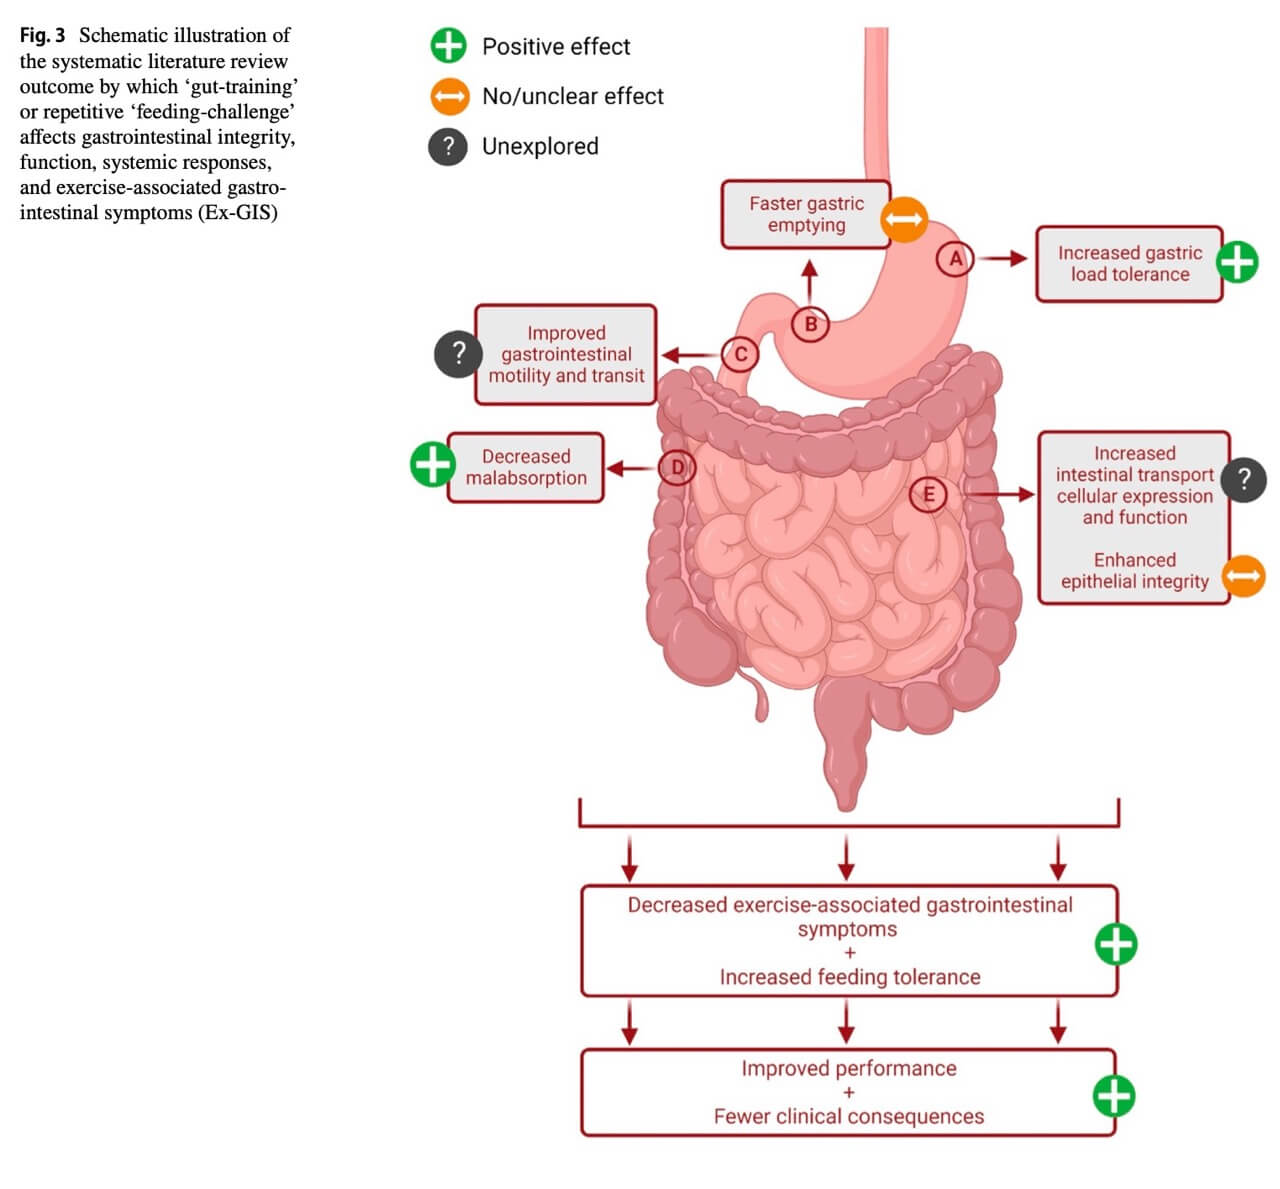 Diagram of Intestinal Tract and Effects of Gut Training on Gastrointestinal Integrity